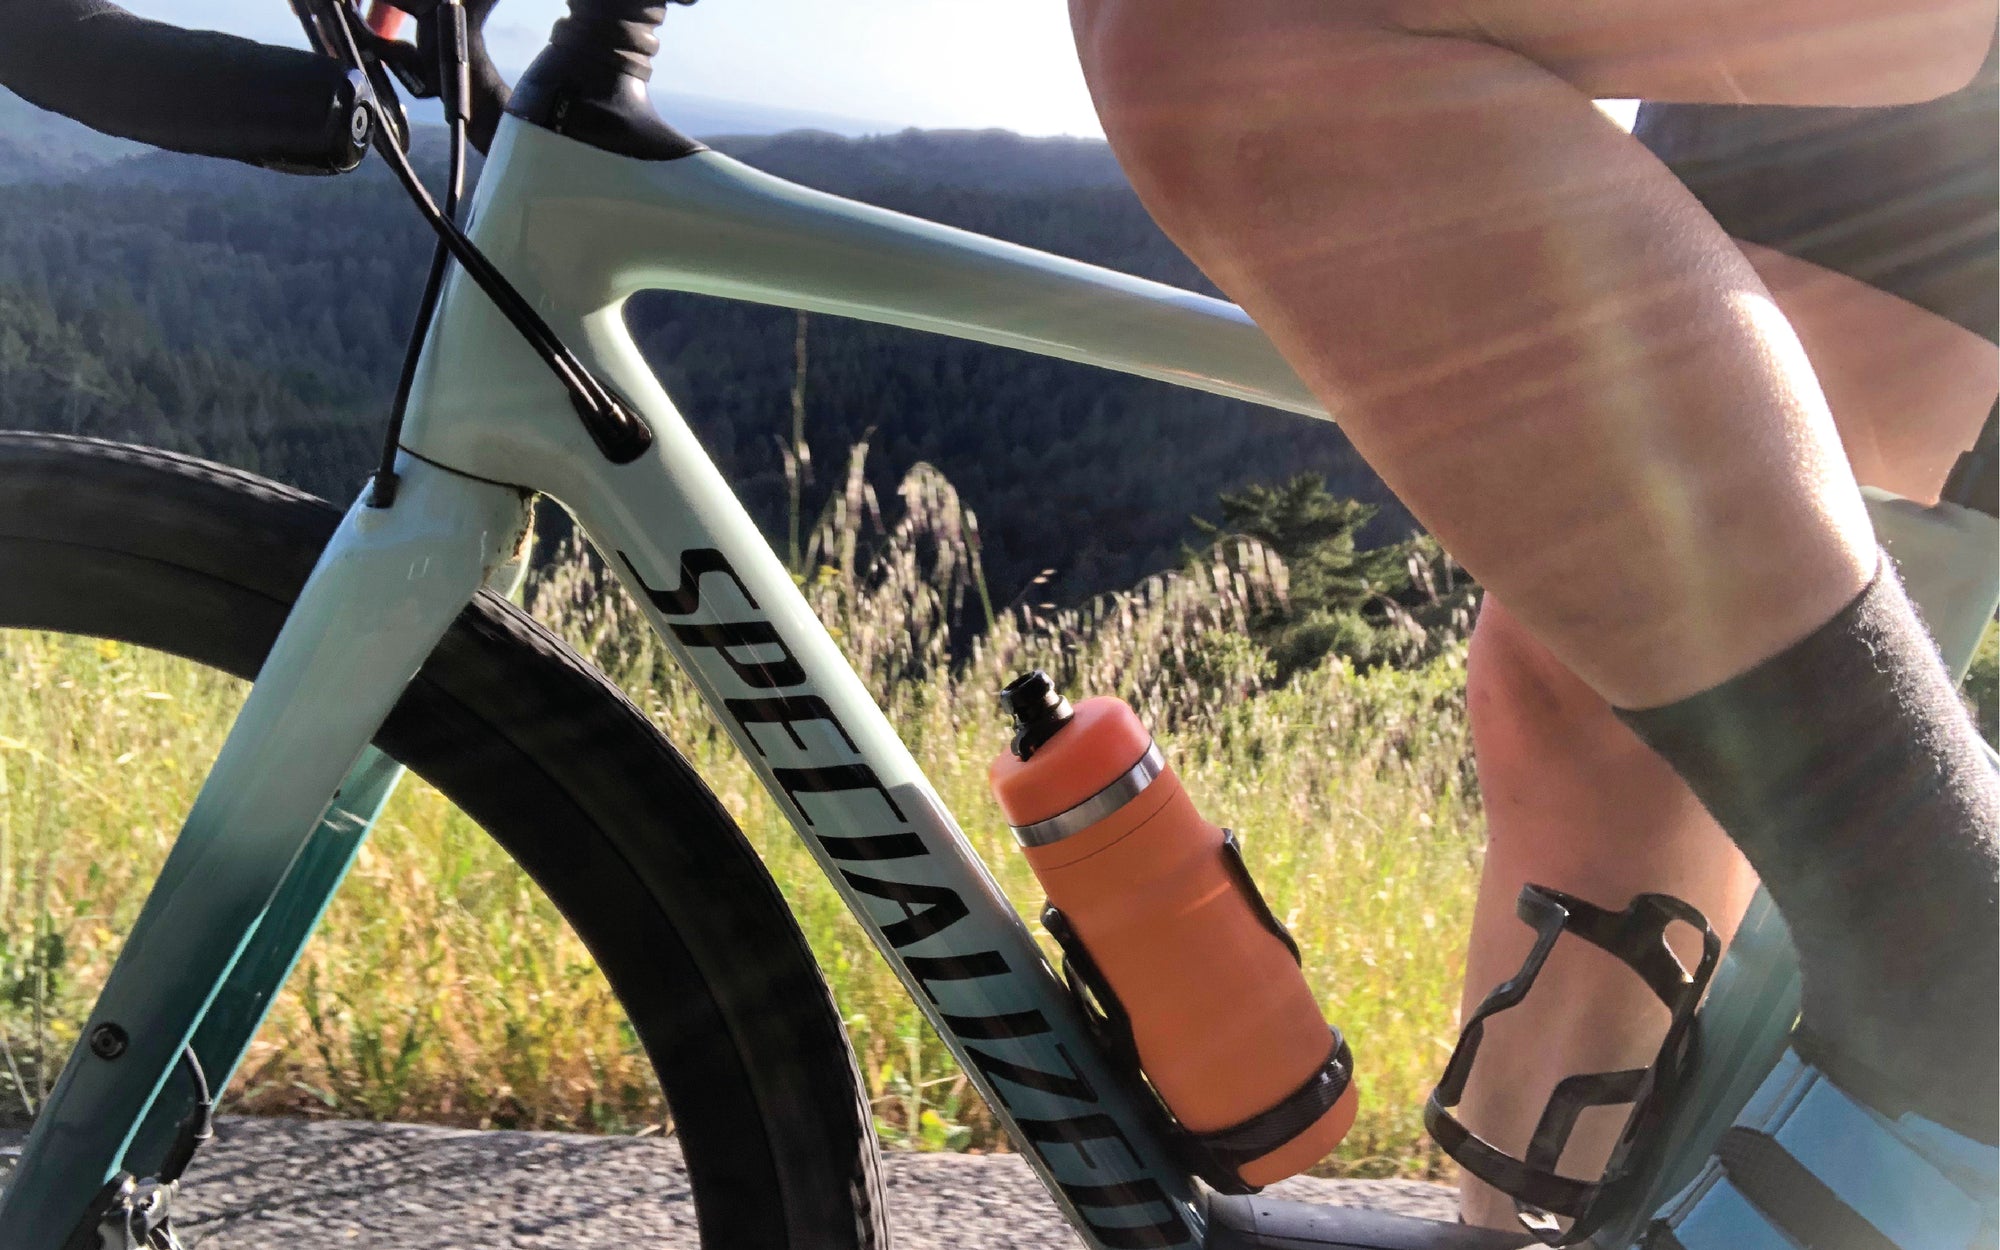 Bivo One stainless steel performance bike water bottle on bike. Built with a flow-rate fit for cyclists and from stainless steel for a clean taste.